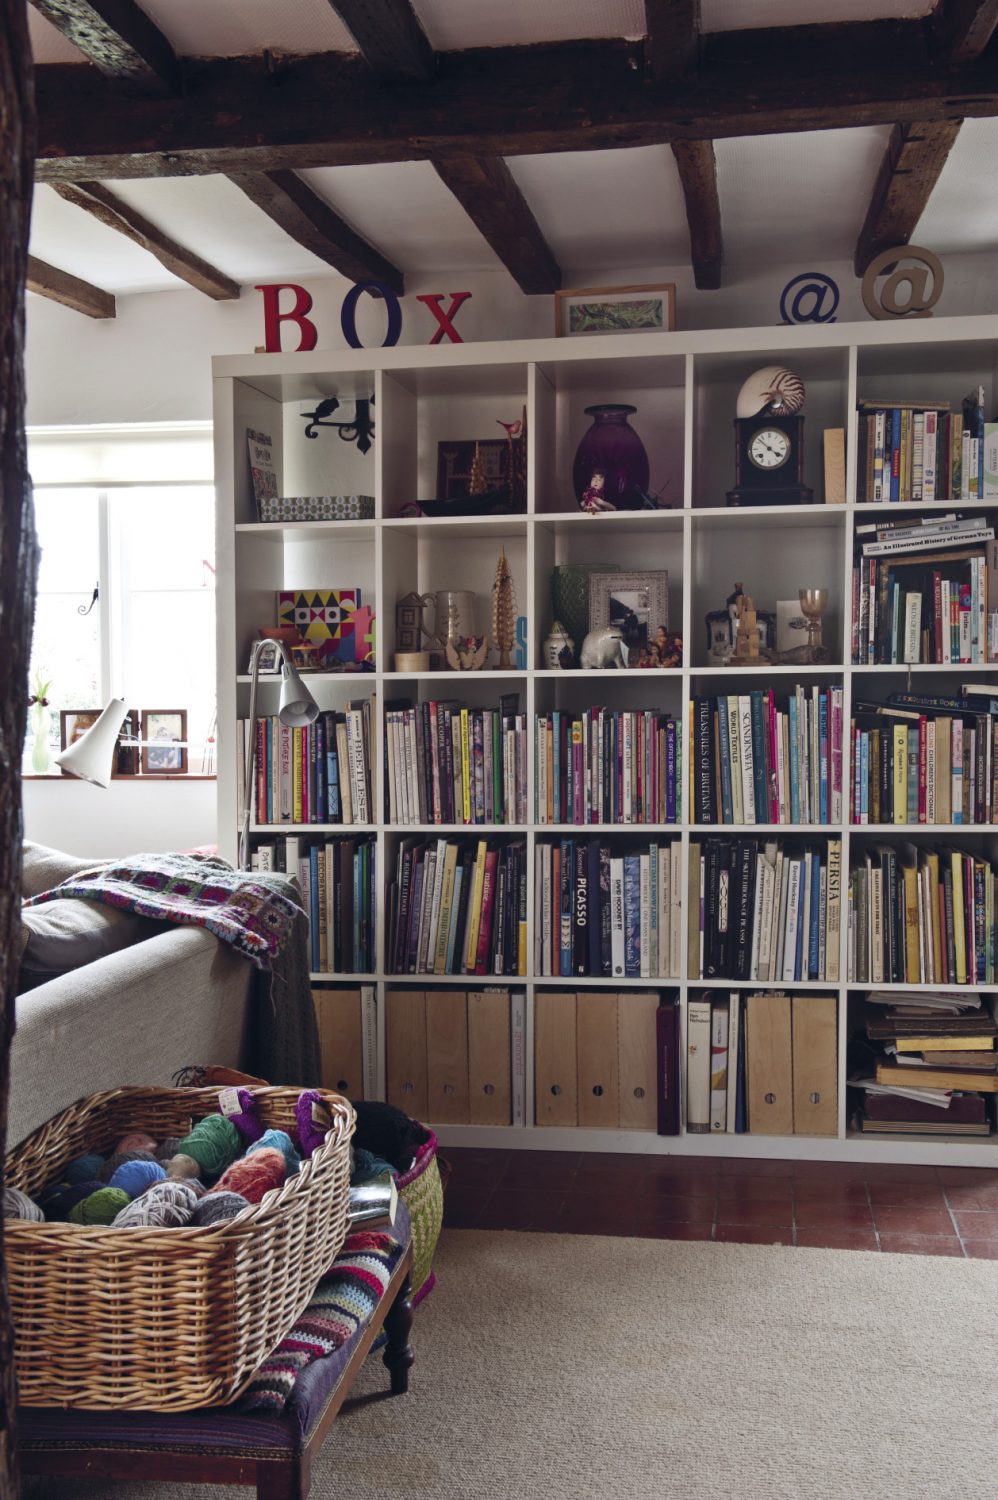 Two sides of the room are covered with shelves with books, files and vintage wooden toys